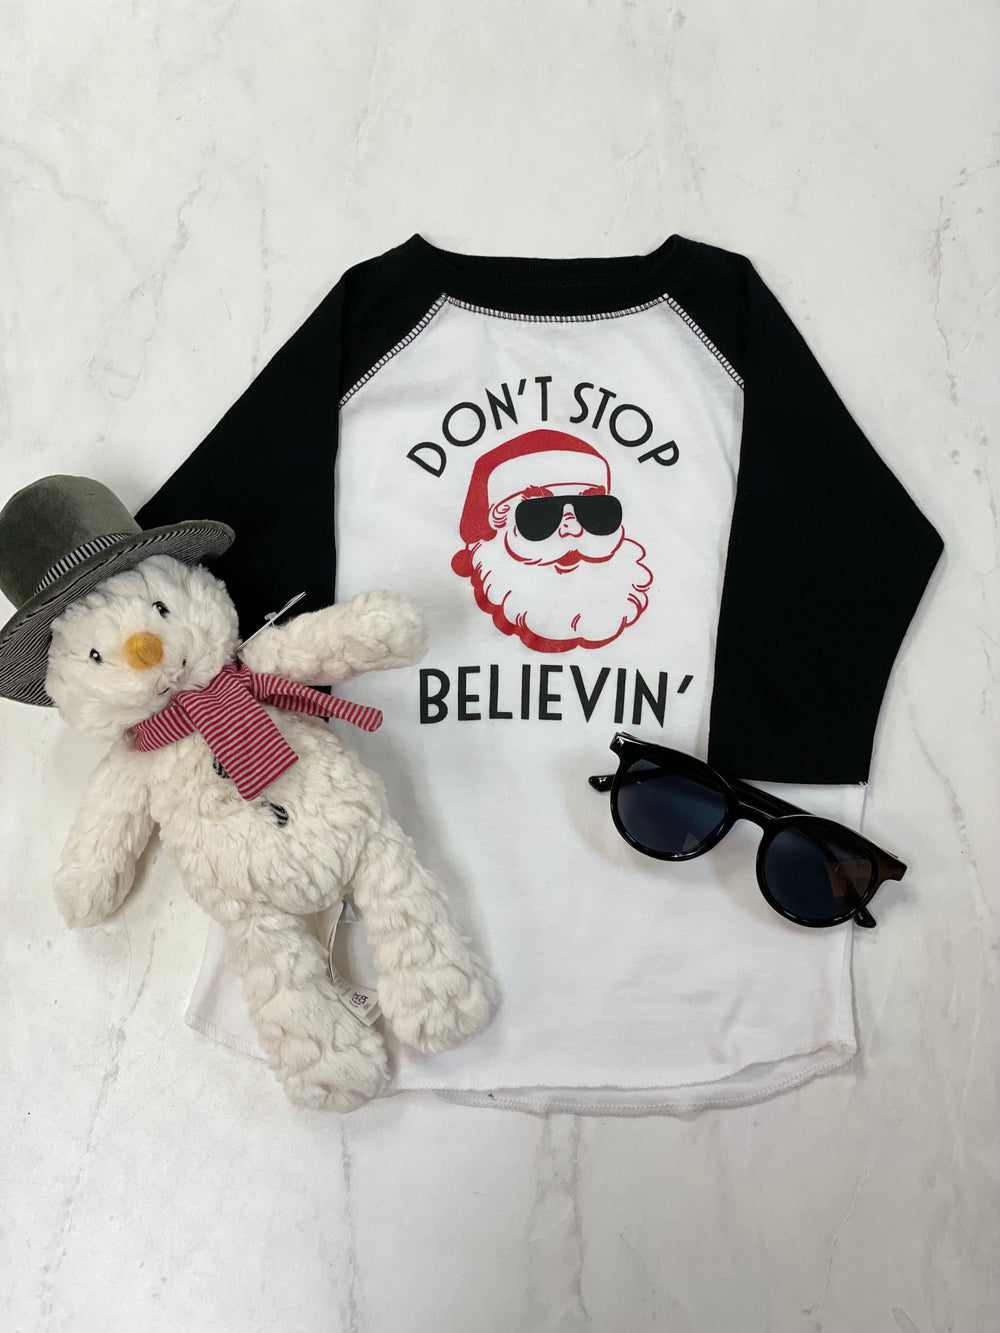 Don't Stop Believing Kids Shirt - ShopSpoiled